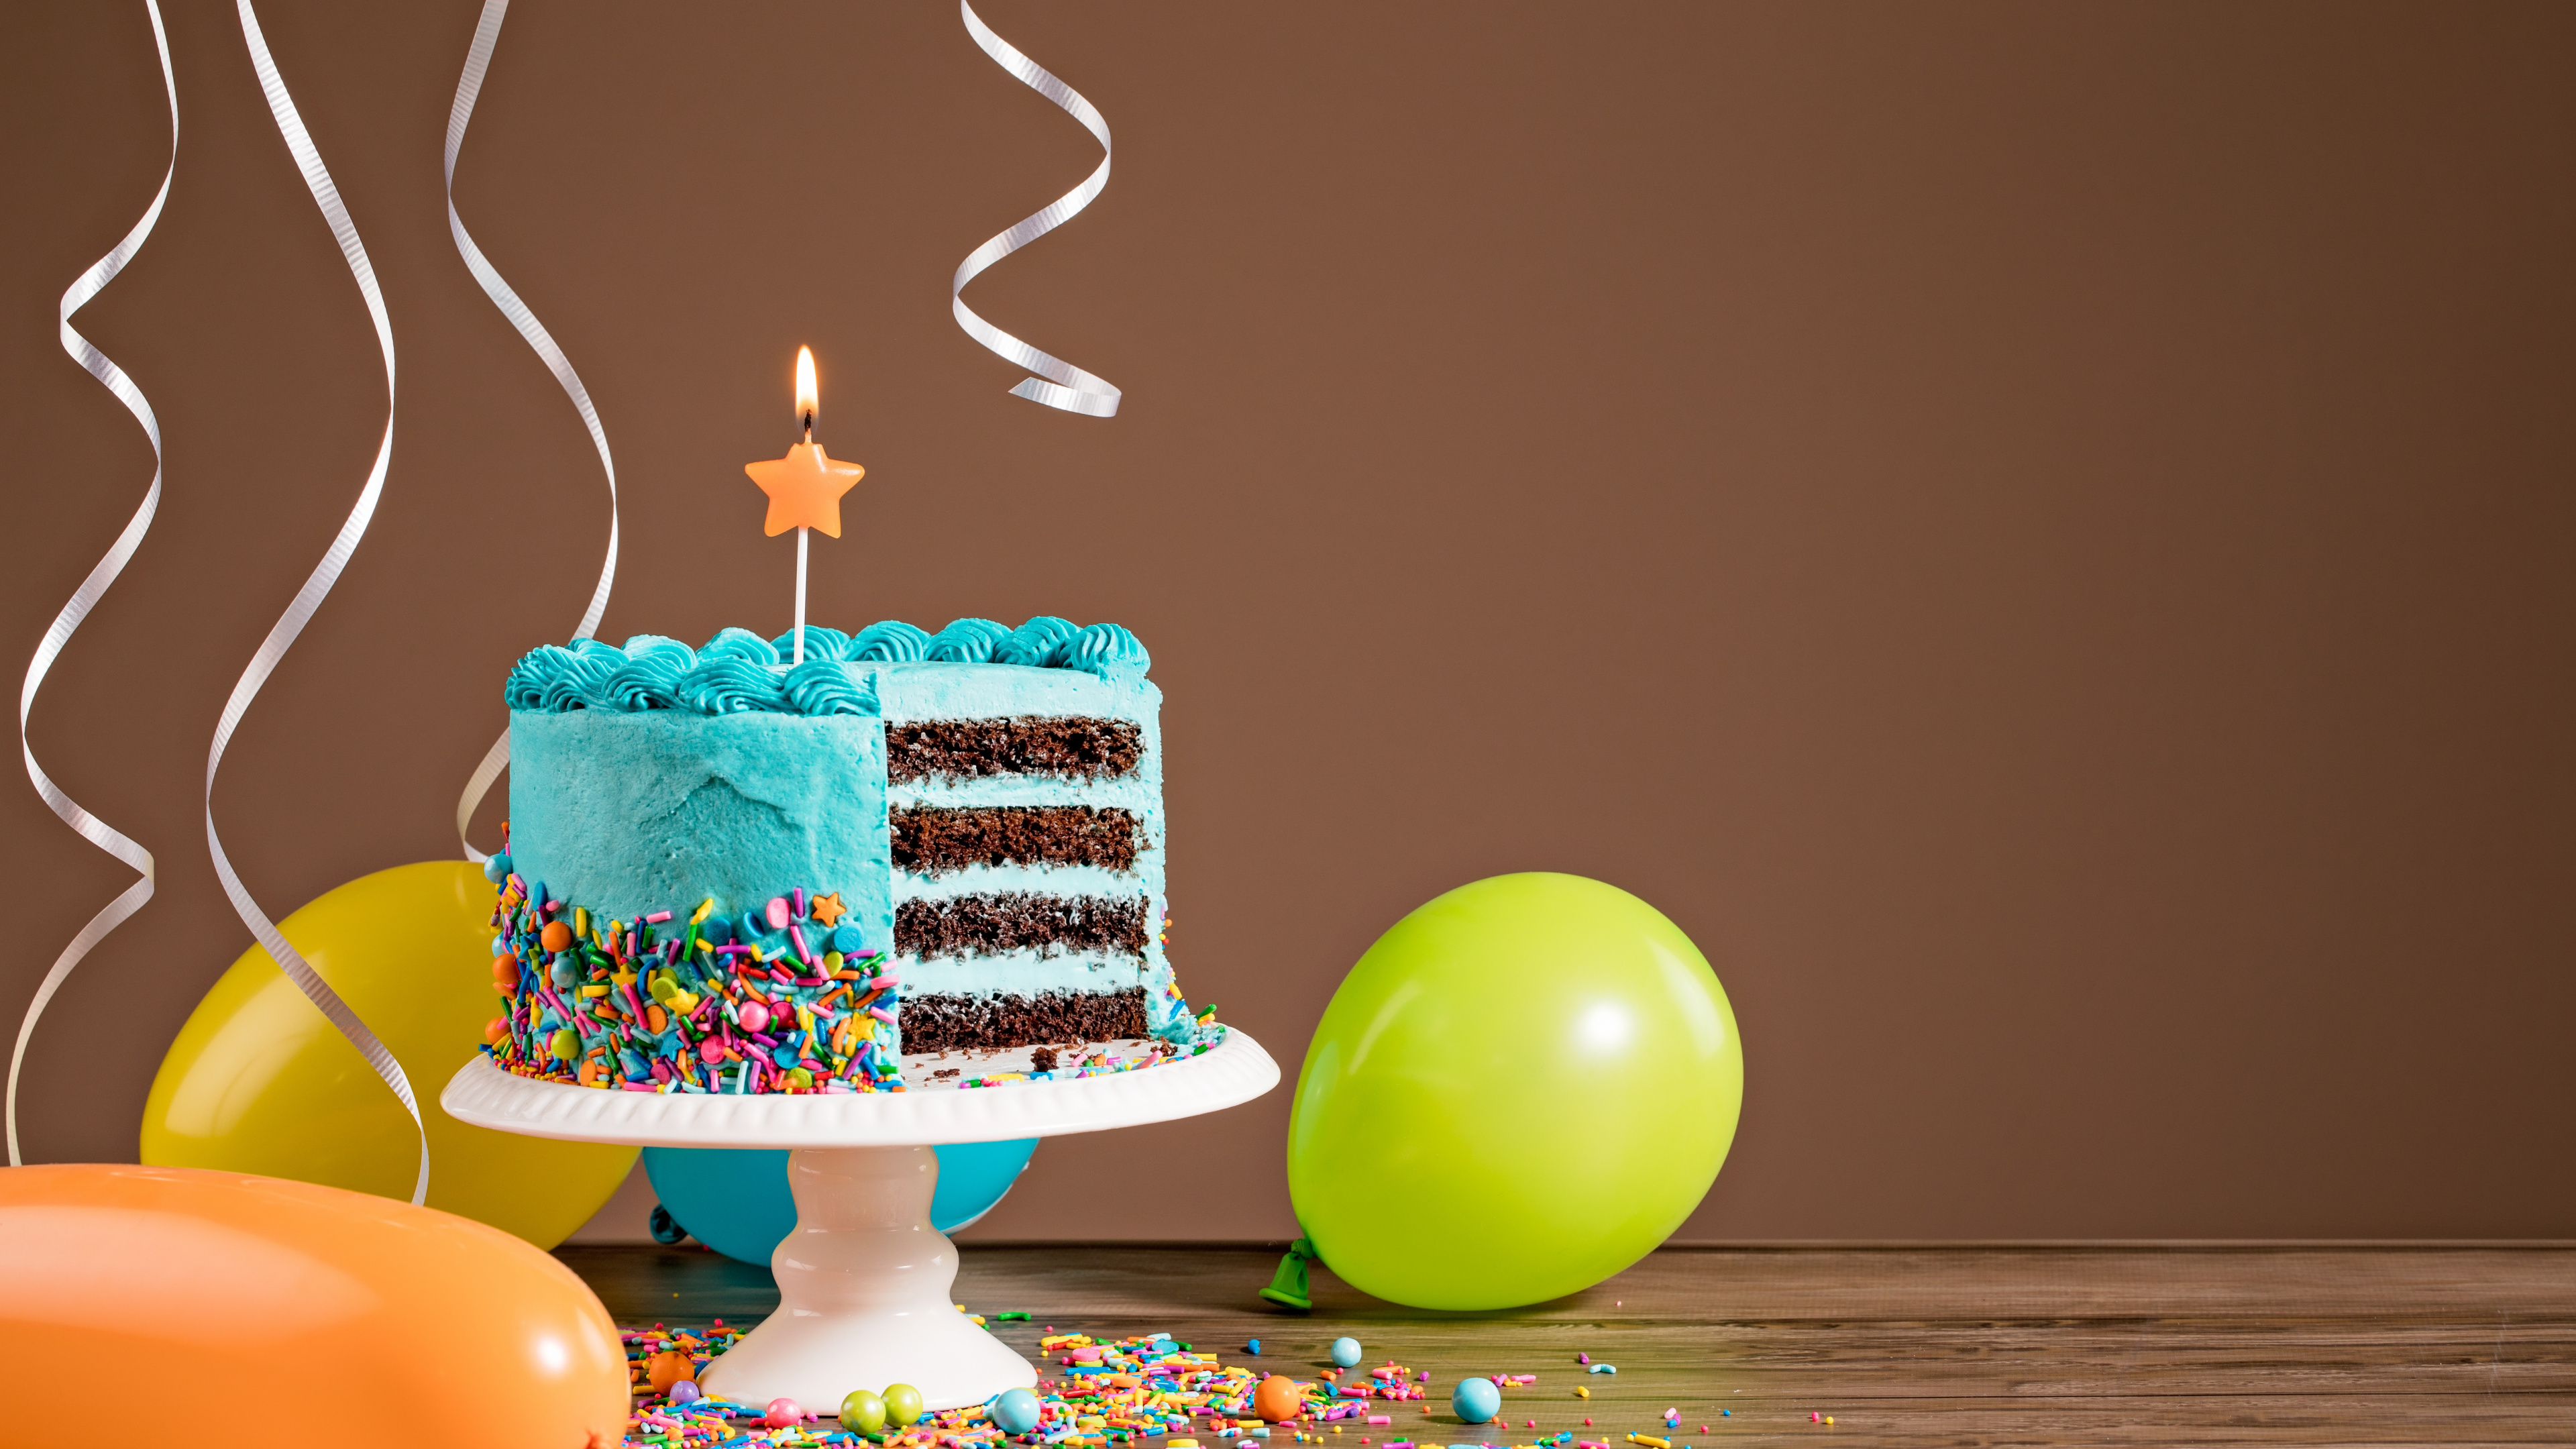 128310 Cake, Candles, 4K, Happy Birthday - Rare Gallery HD Wallpapers